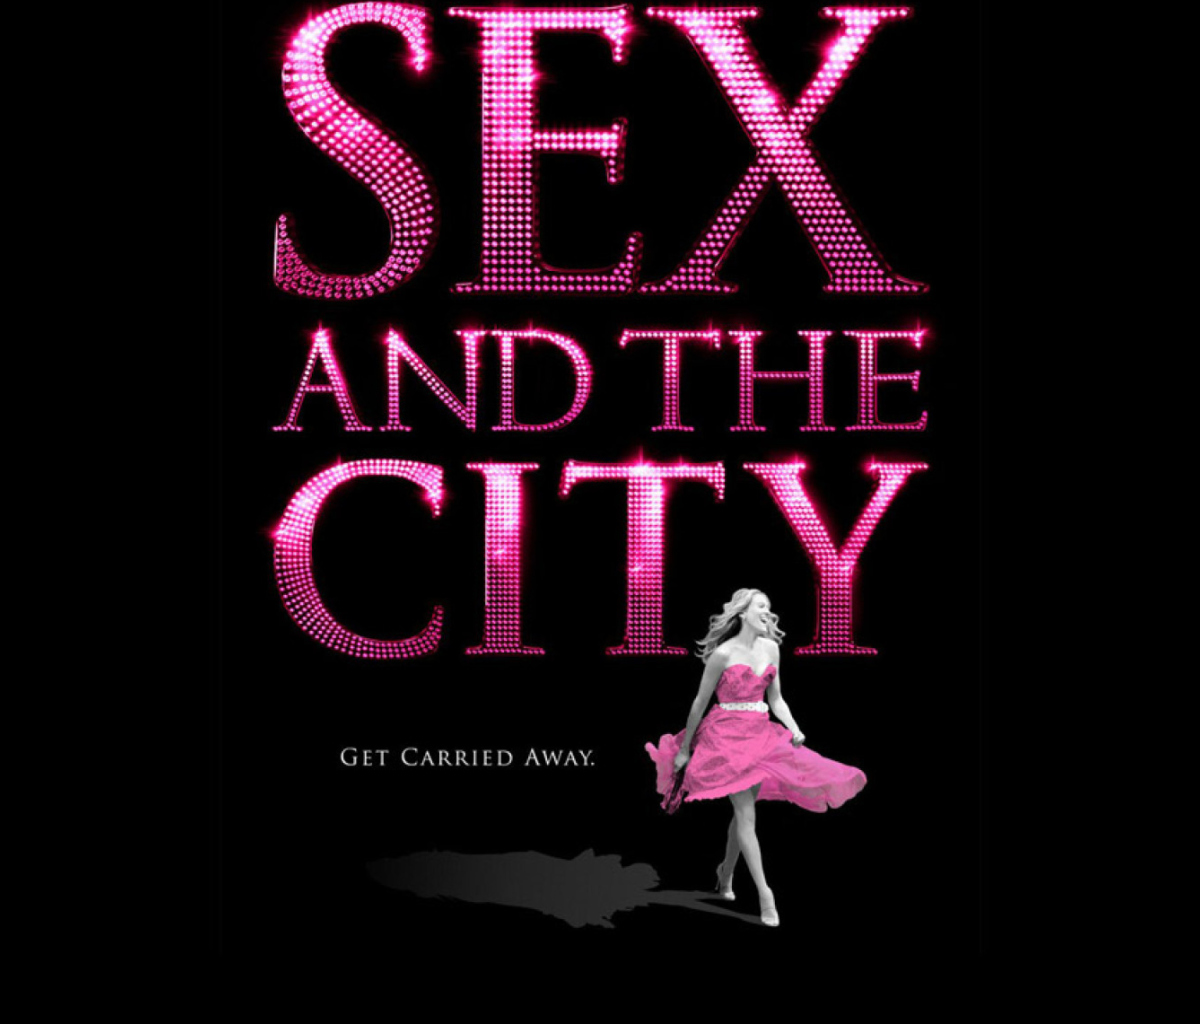 Sex And The City wallpaper 1200x1024